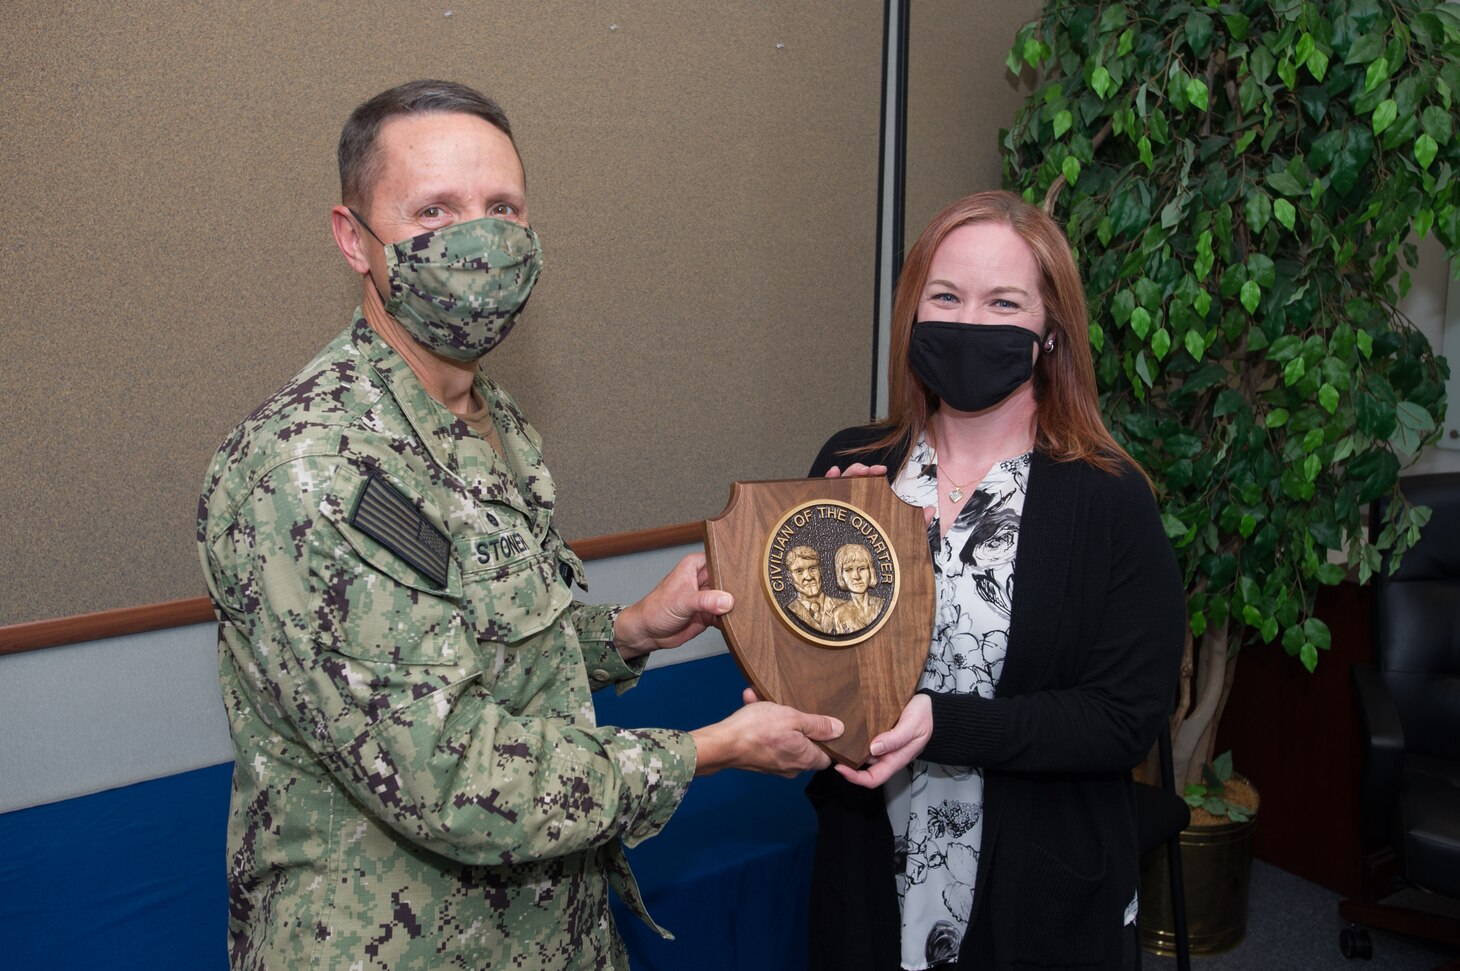 DAHLGREN, Va. (April 20, 2021) Center for Surface Combat Systems (CSCS) Commanding Officer, Capt. Dave Stoner, recognizes Ms. Cyndy Duscio, the information system security manager and cybersecurity workforce program manager for CSCS’ chief information officer, N6, as headquarters’ Civilian of the Quarter for the first quarter of 2021, at a socially-distanced awards ceremony onboard Naval Support Facility Dahlgren, Va.  (U.S. Navy photo by Michael Bova)